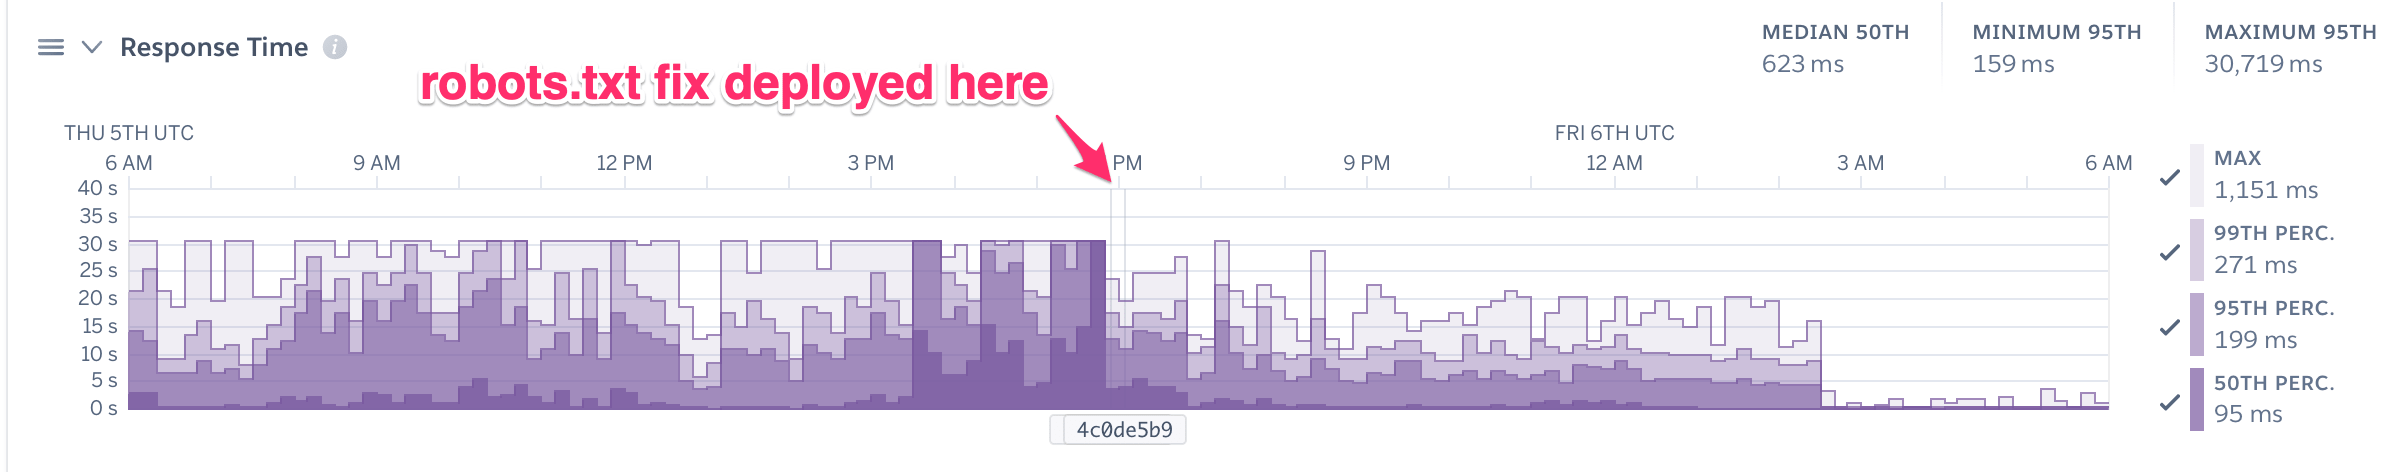 Heroku metrics showing a dramatic improvement after the deploy, and especially about 8 hours later